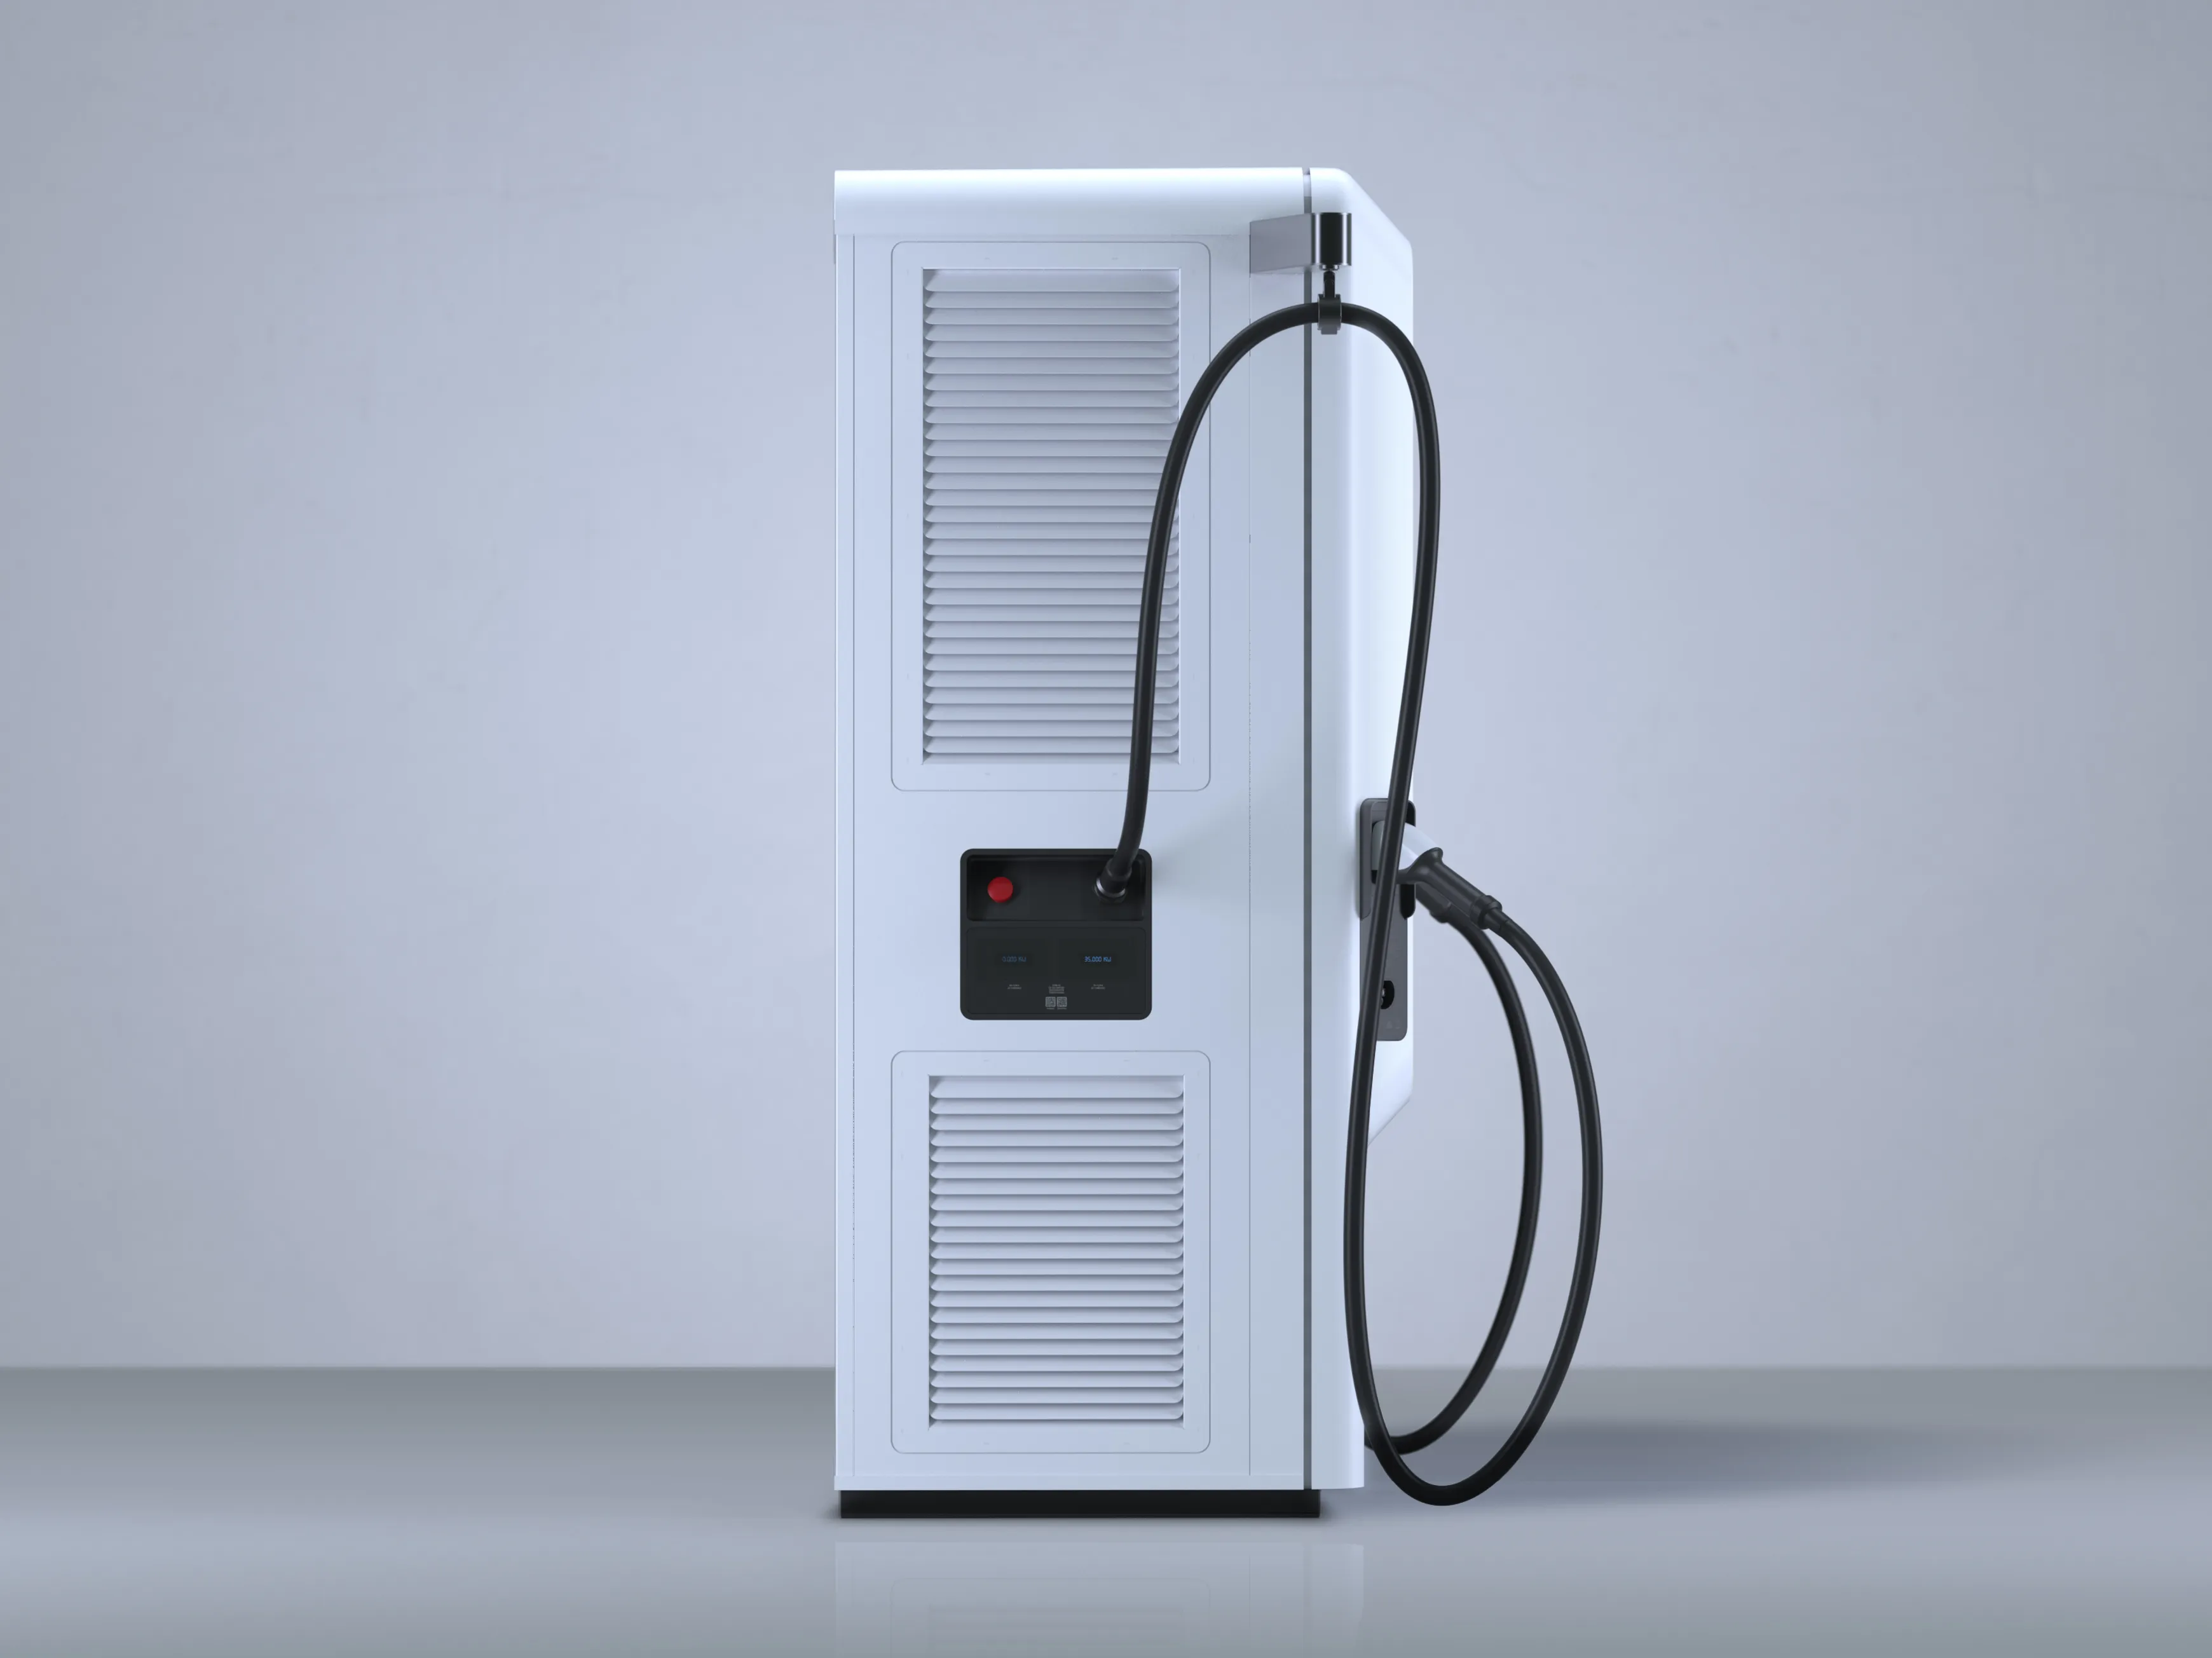 A side view of the BTC fast charger